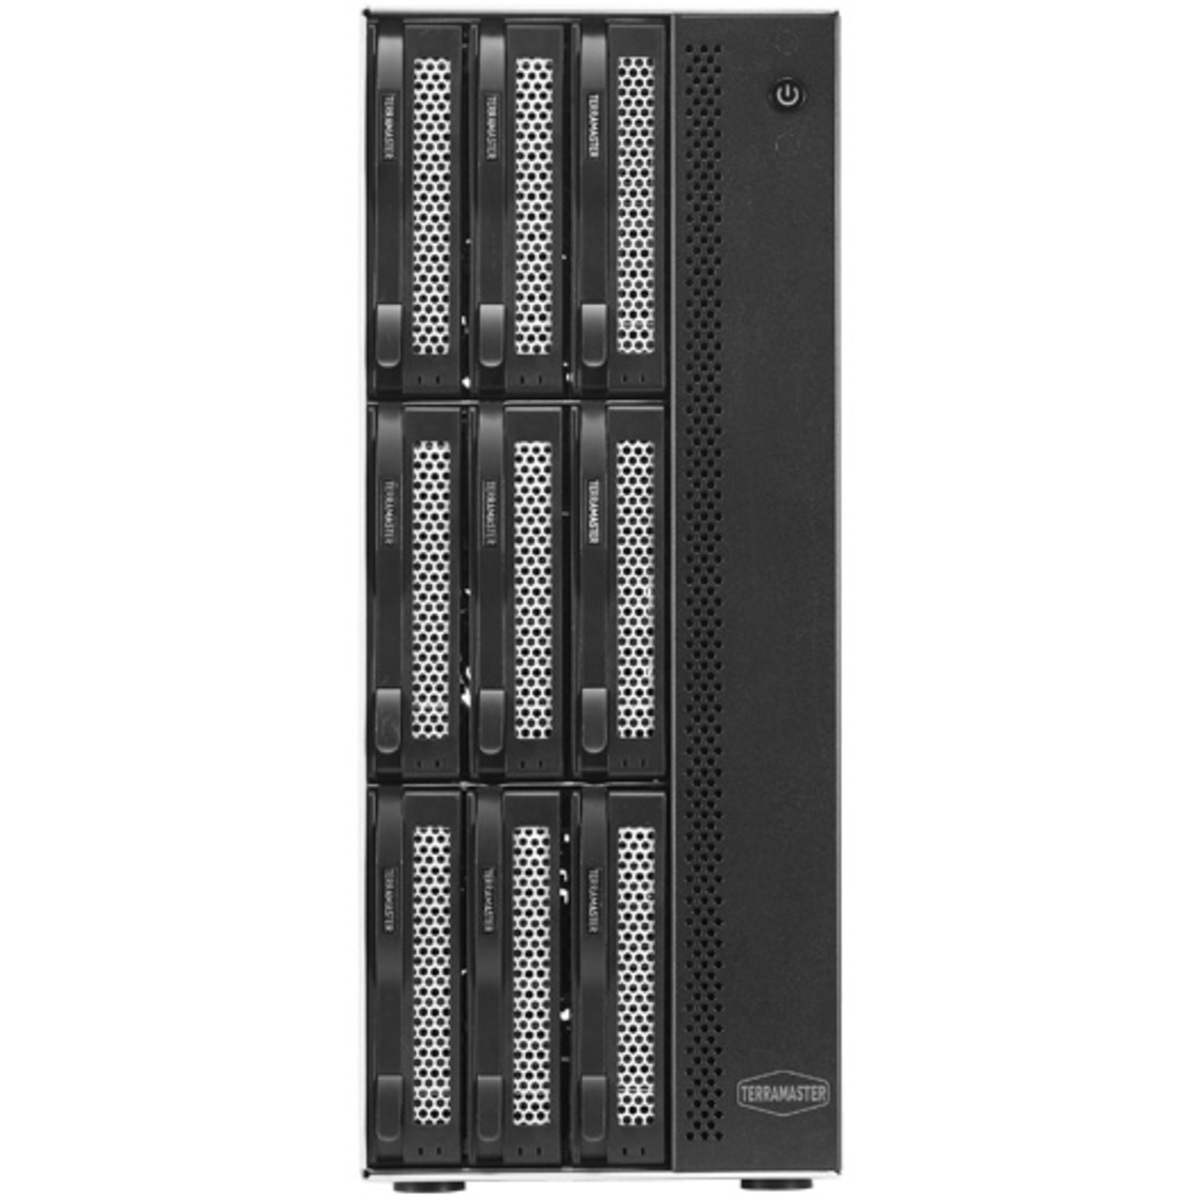 buy $5721 TerraMaster T9-423 72tb Desktop NAS - Network Attached Storage Device 9x8000gb Samsung 870 QVO MZ-77Q8T0 2.5 560/530MB/s SATA 6Gb/s SSD CONSUMER Class Drives Installed - Burn-In Tested - nas headquarters buy network attached storage server device das new raid-5 free shipping usa T9-423